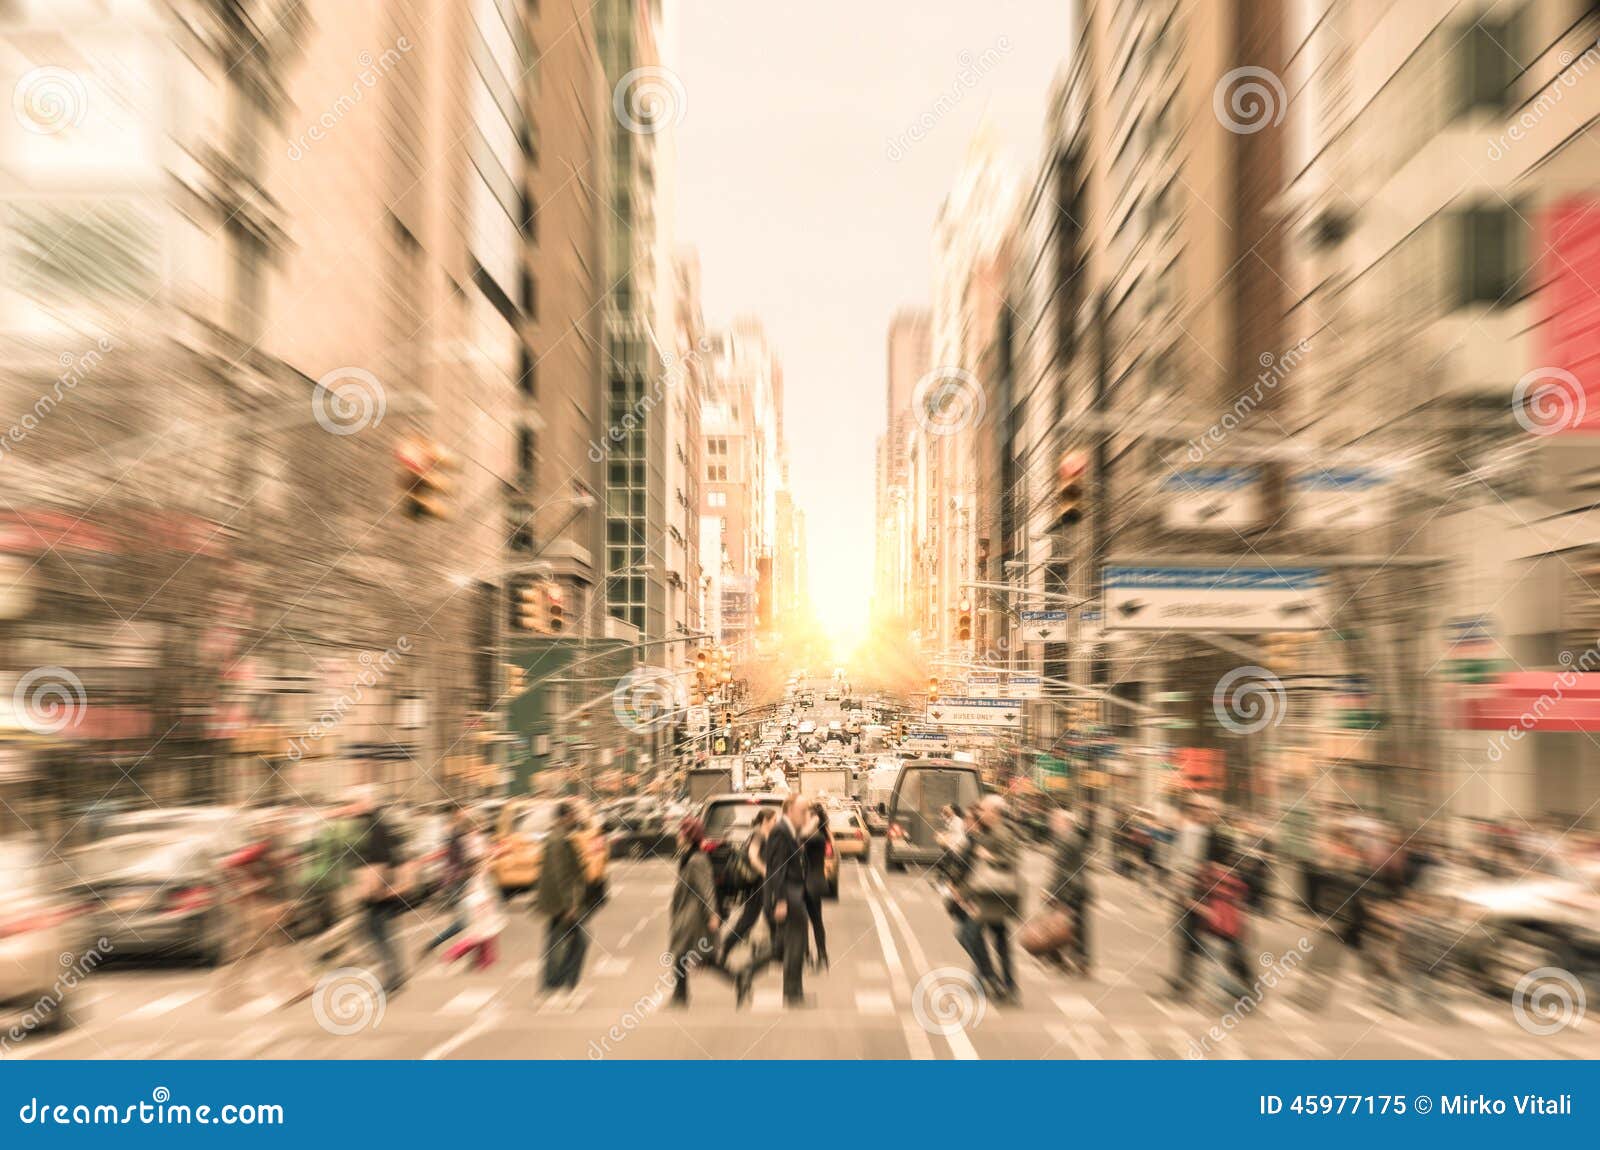 people on the street on madison avenue in manhattan downtown before sunset in new york city - commuters walking on zebra crossing